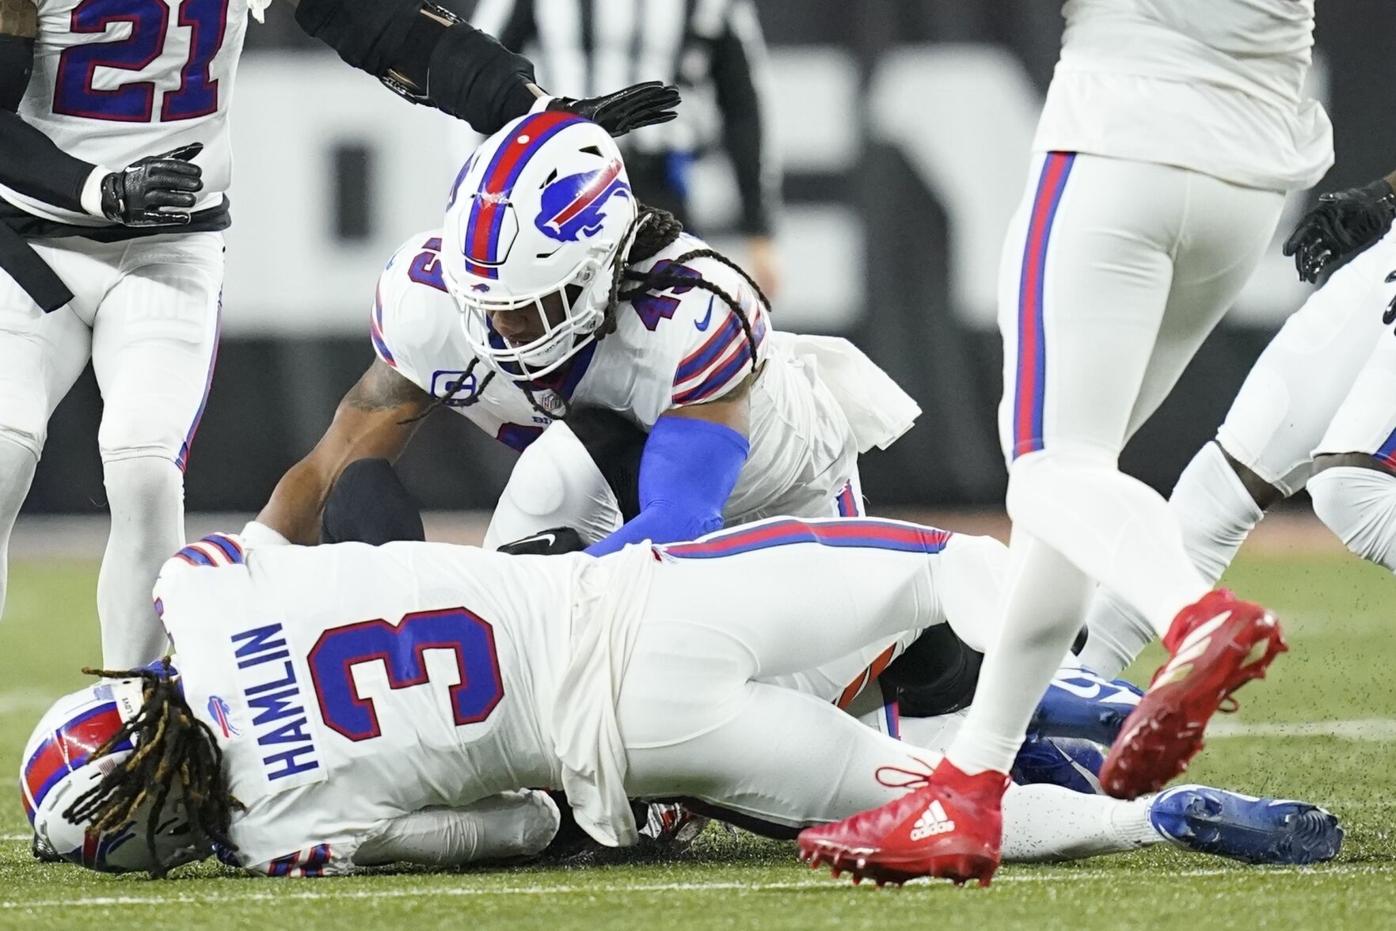 Cause of Buffalo Bills player's cardiac arrest is unknown, Fact Checking